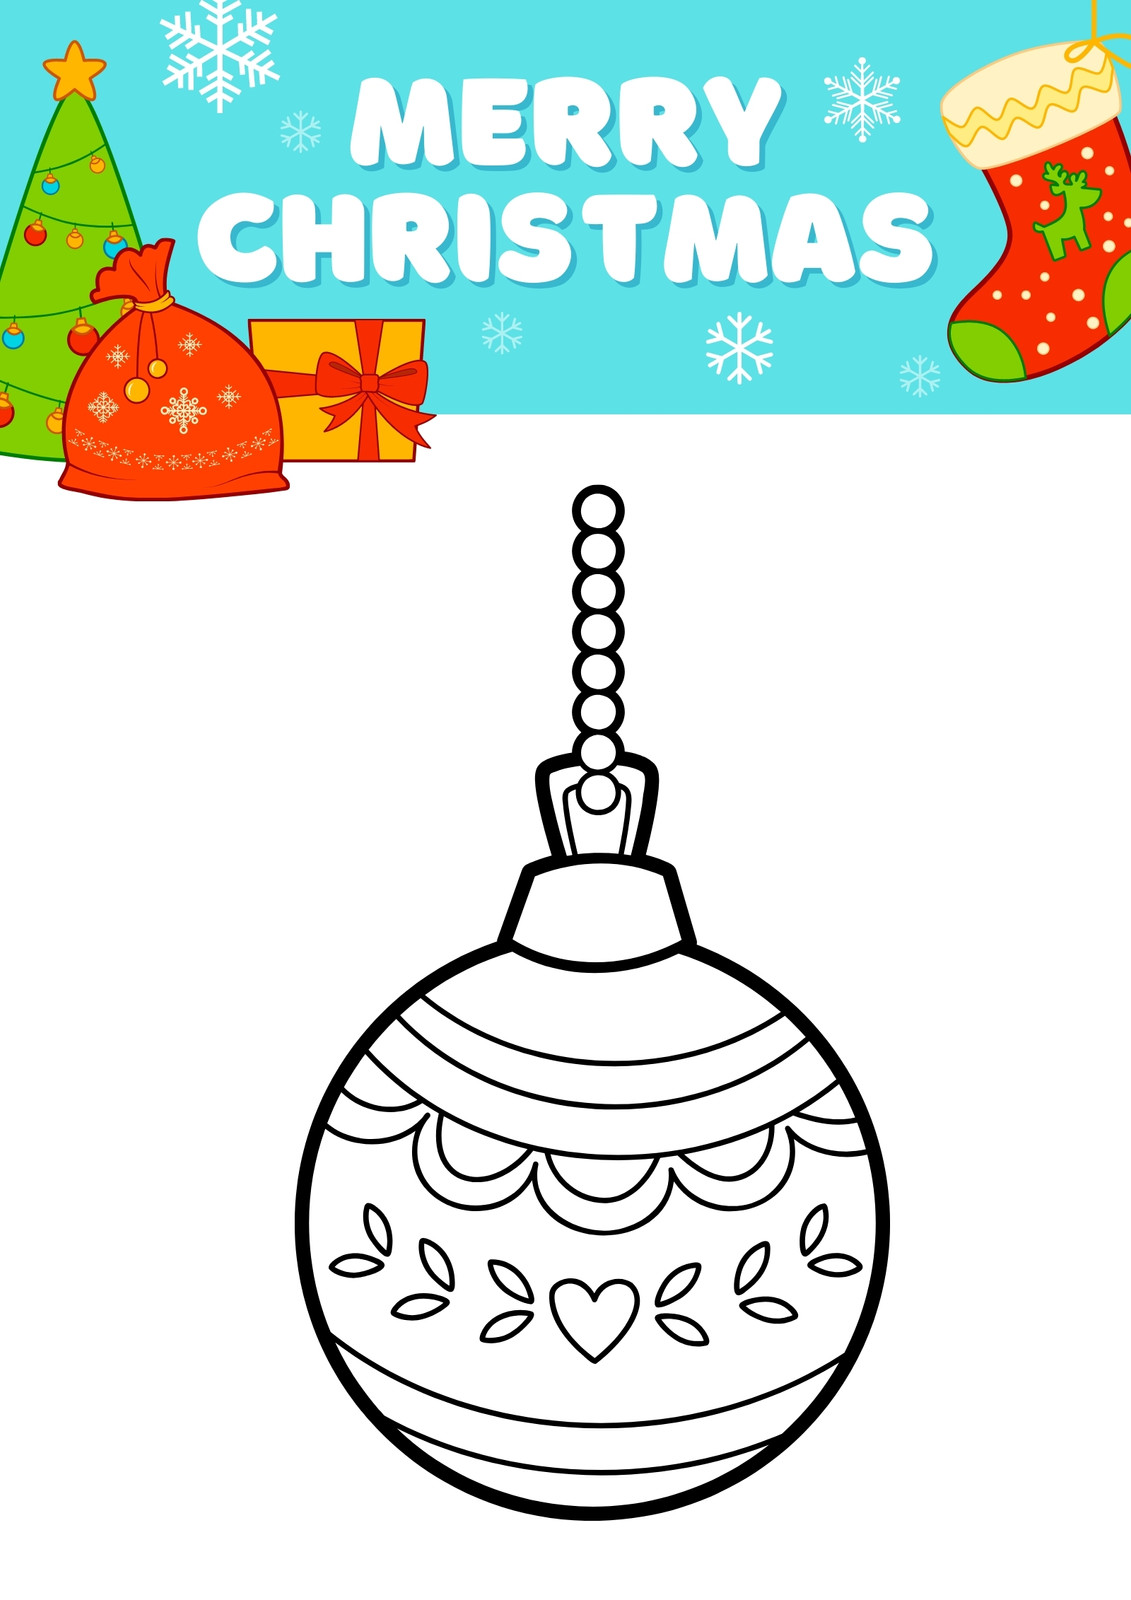 Easy and Beautiful Christmas Drawings and Art Ideas for Kids